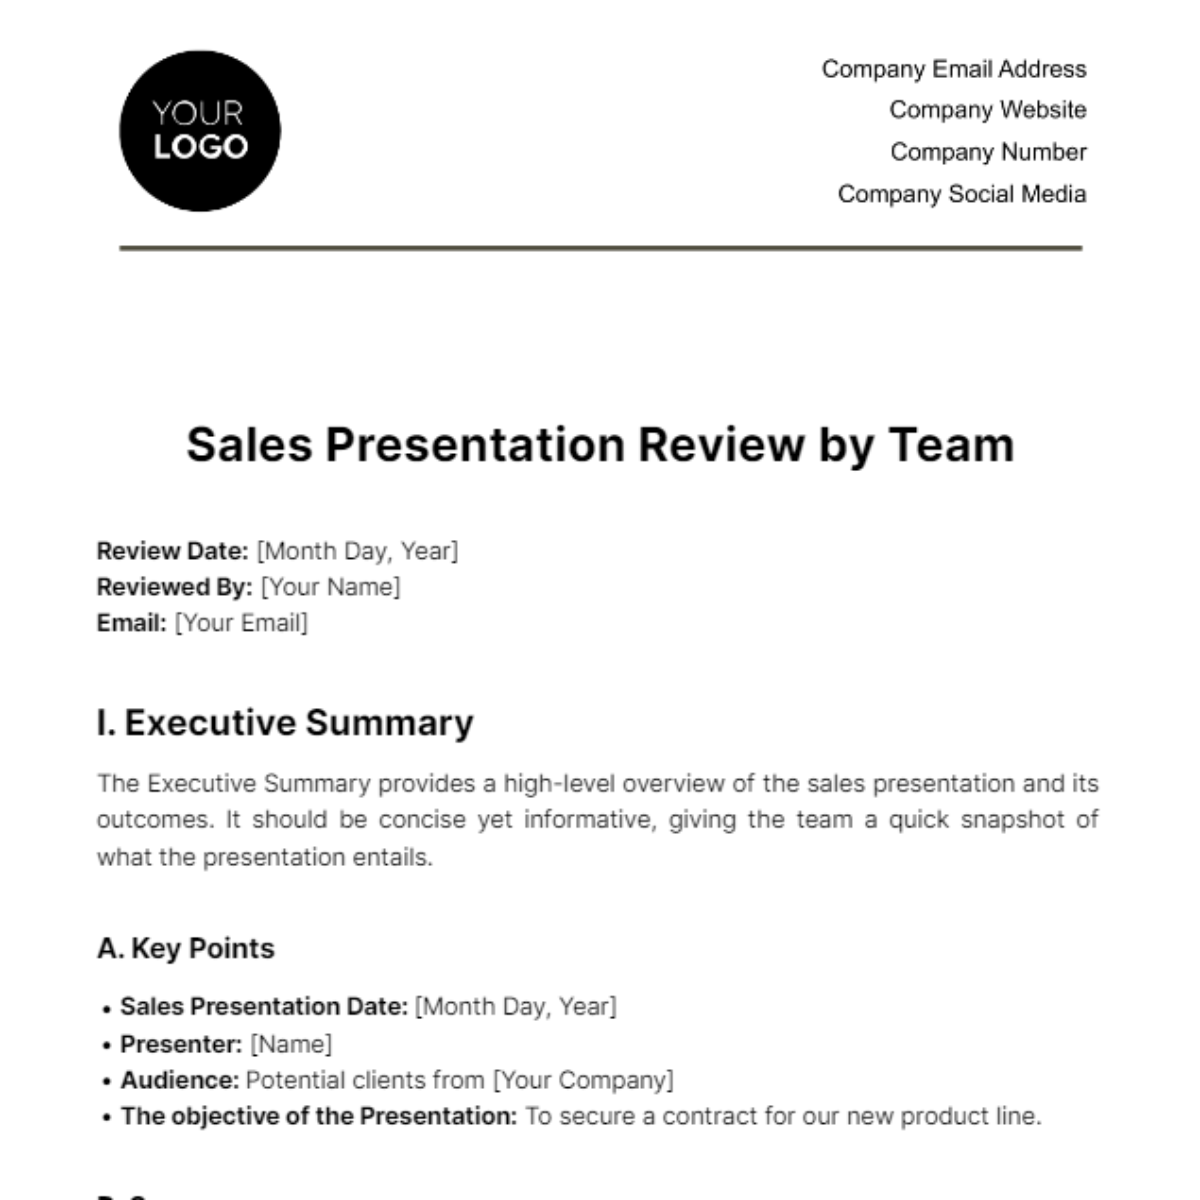 Sales Presentation Review by Team Template